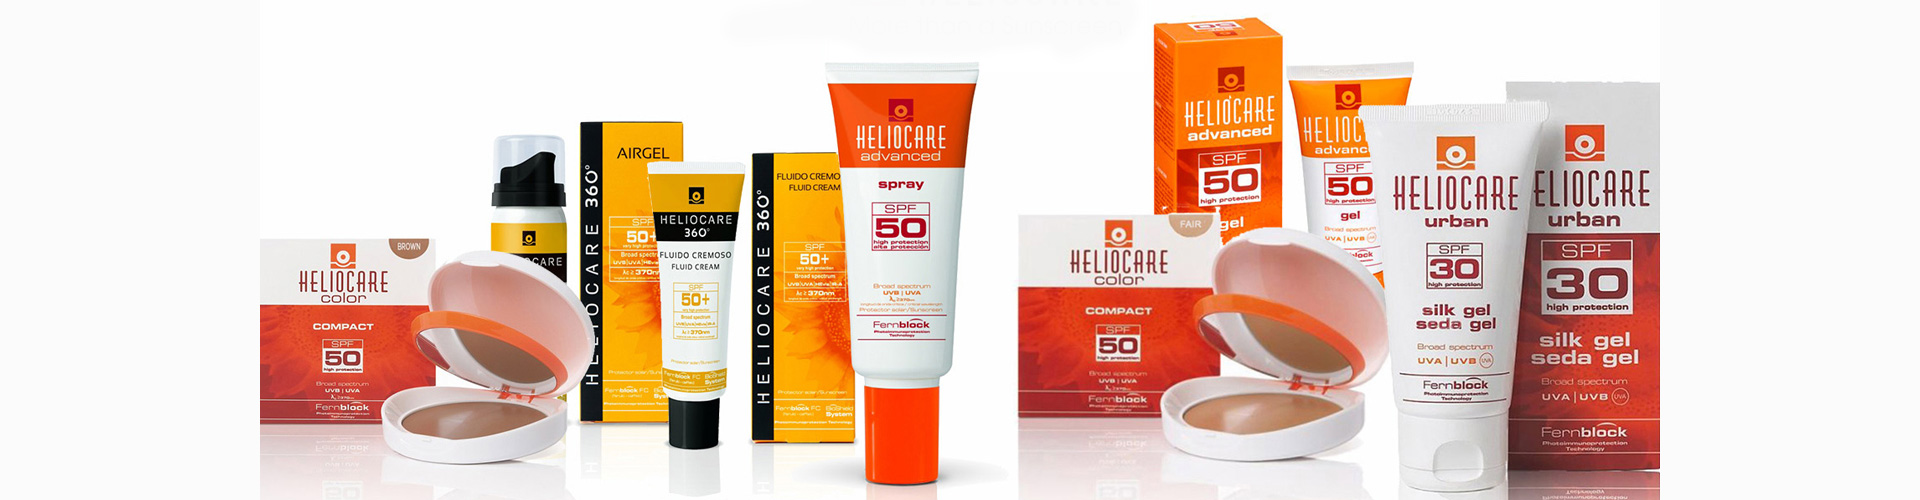 Heliocare Products